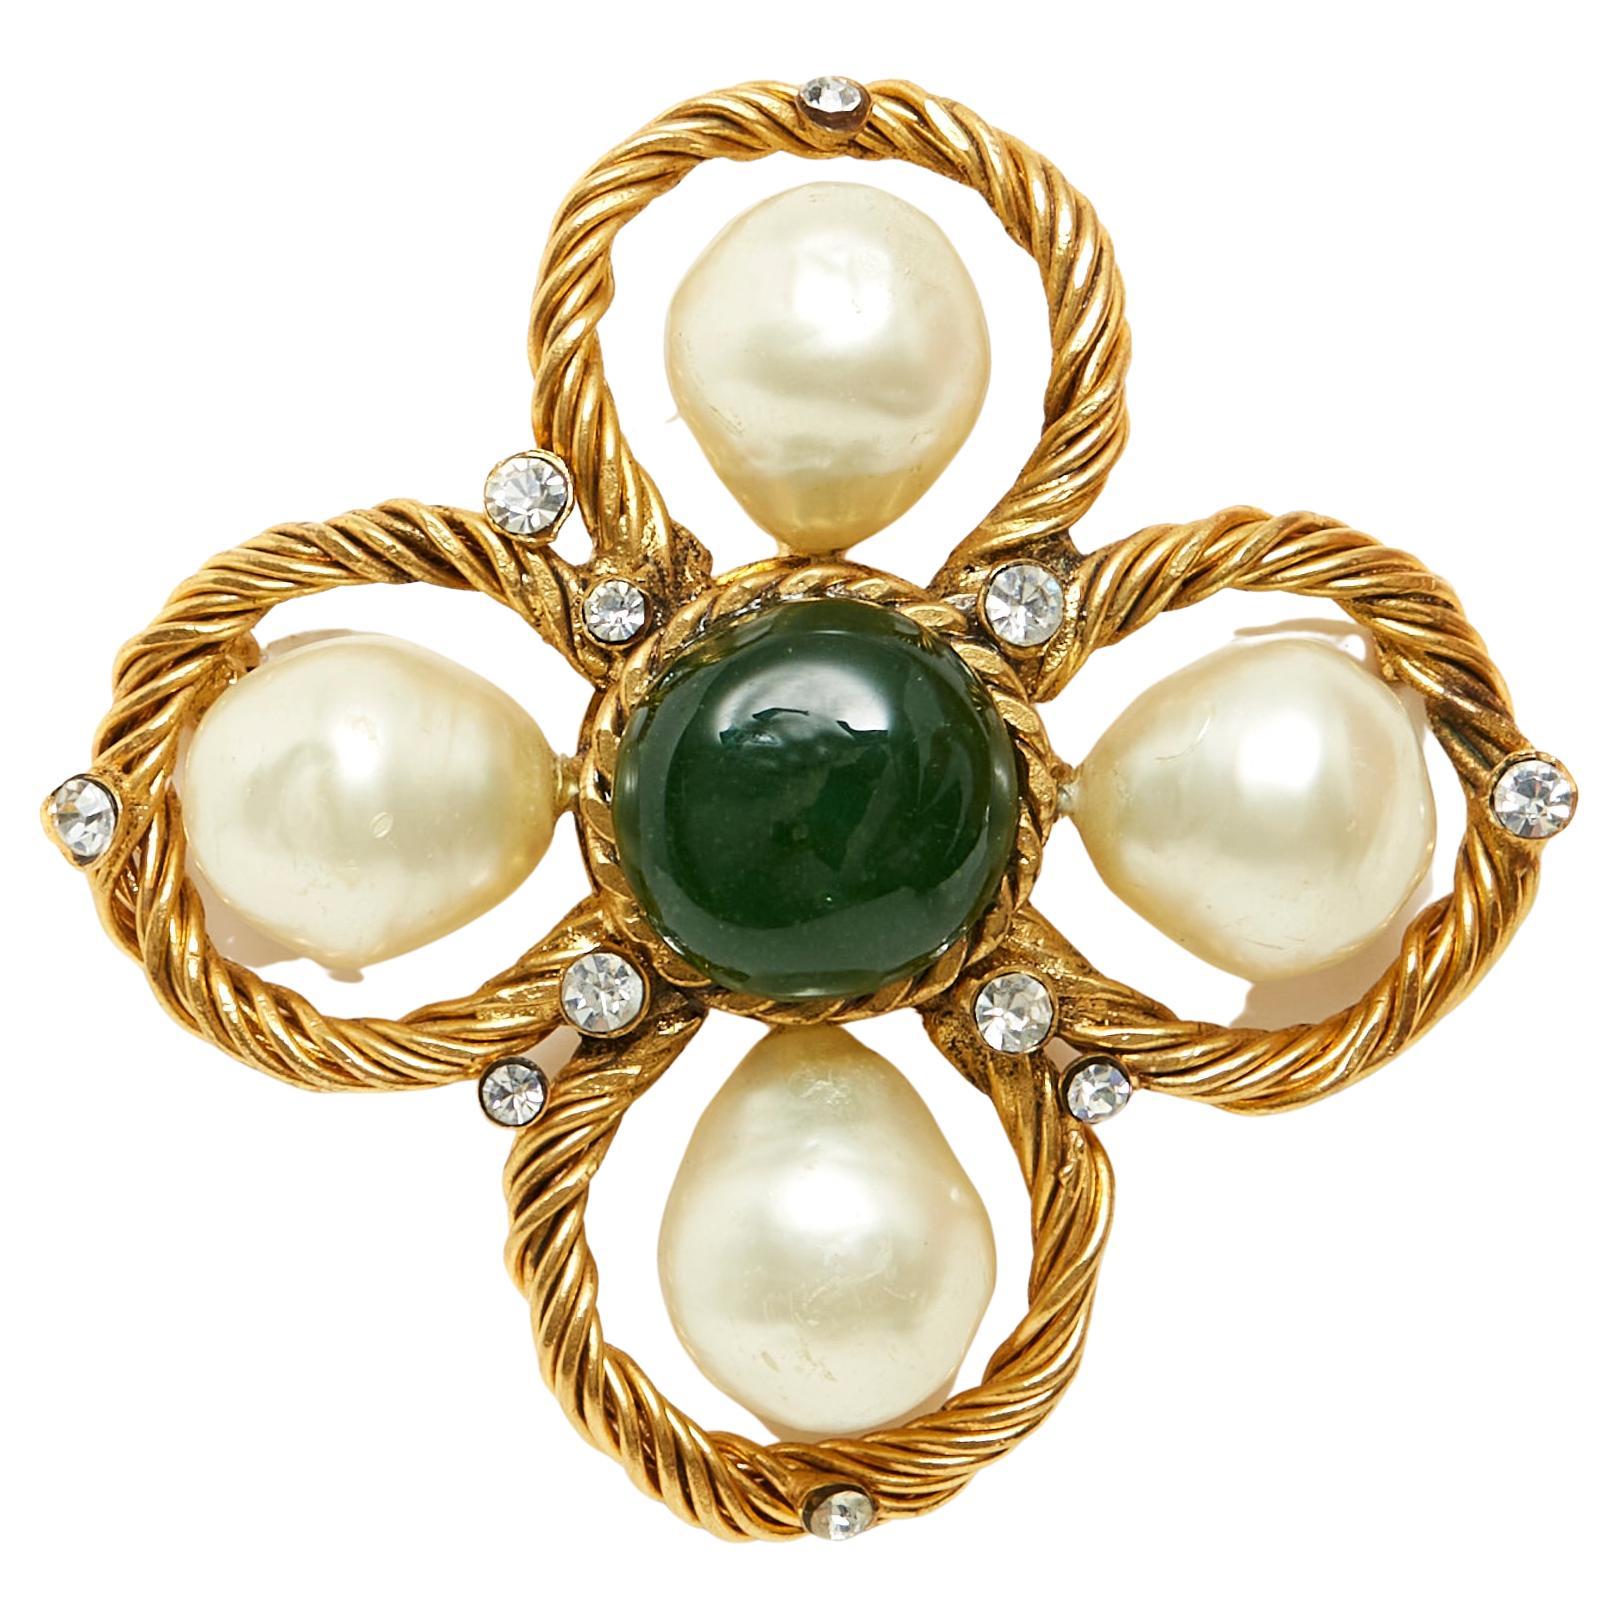 1995 Haute Couture Lucky Clover Chanel Brooch by Gripoix  For Sale